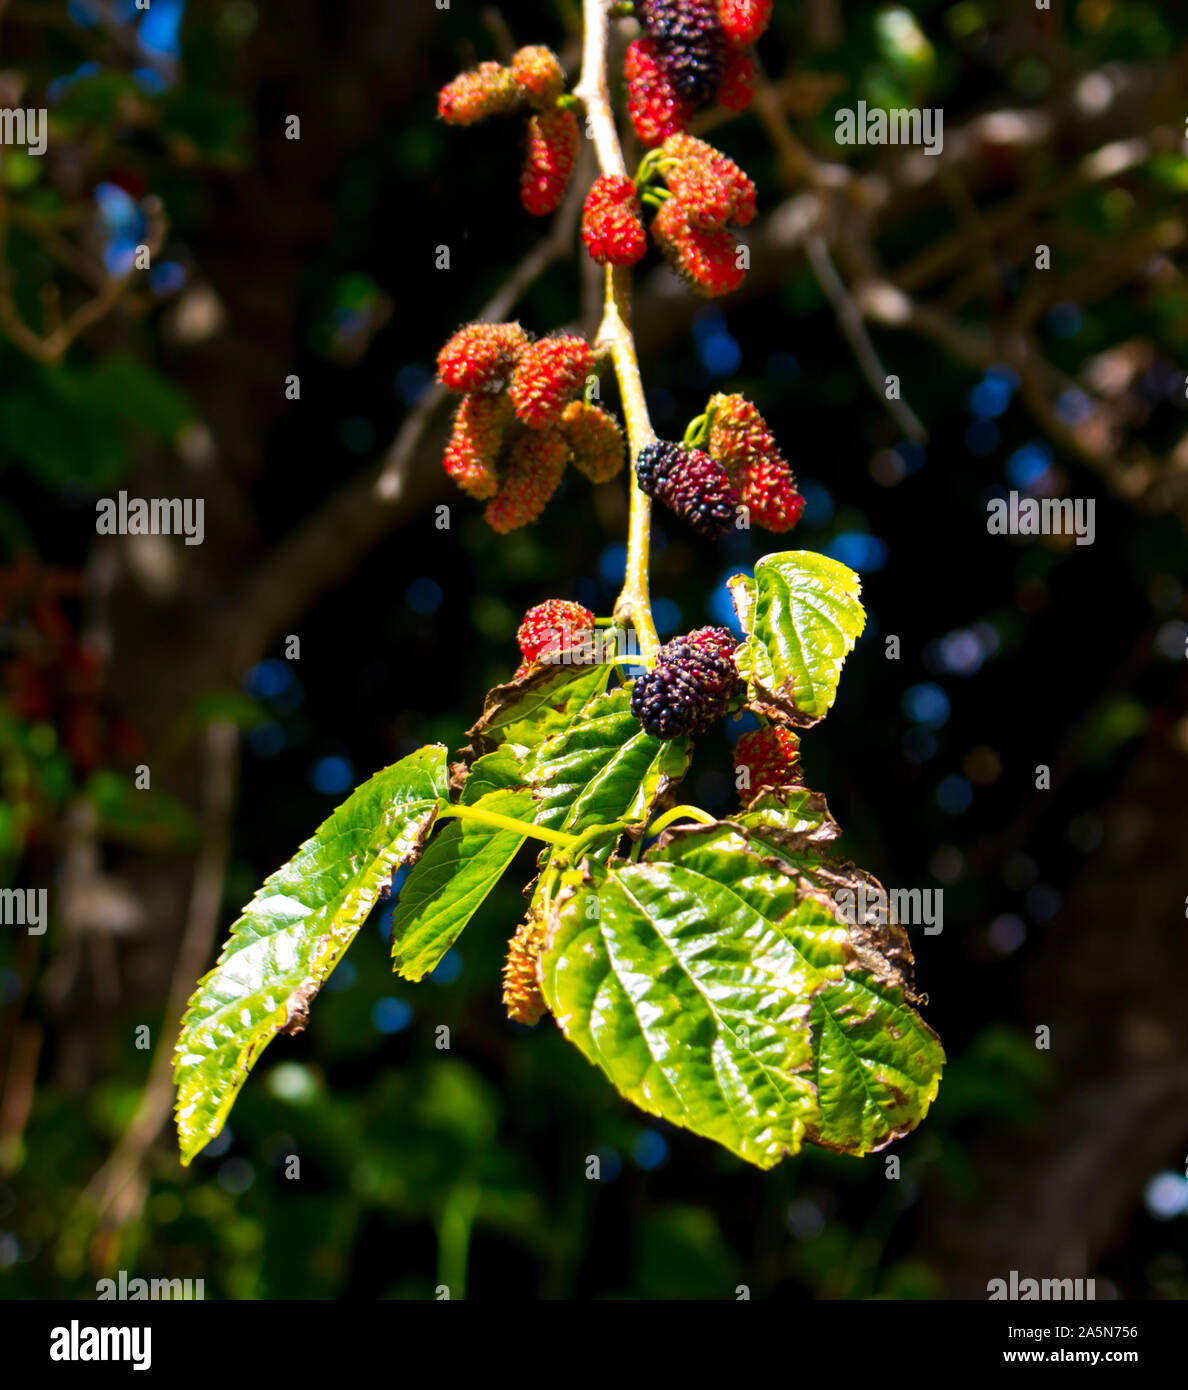 Morus alba Pendula  Weeping Mulberry Tree  a beautiful small tree with long pendulous branches which sweep towards the ground and produce sweet fruit. Stock Photo